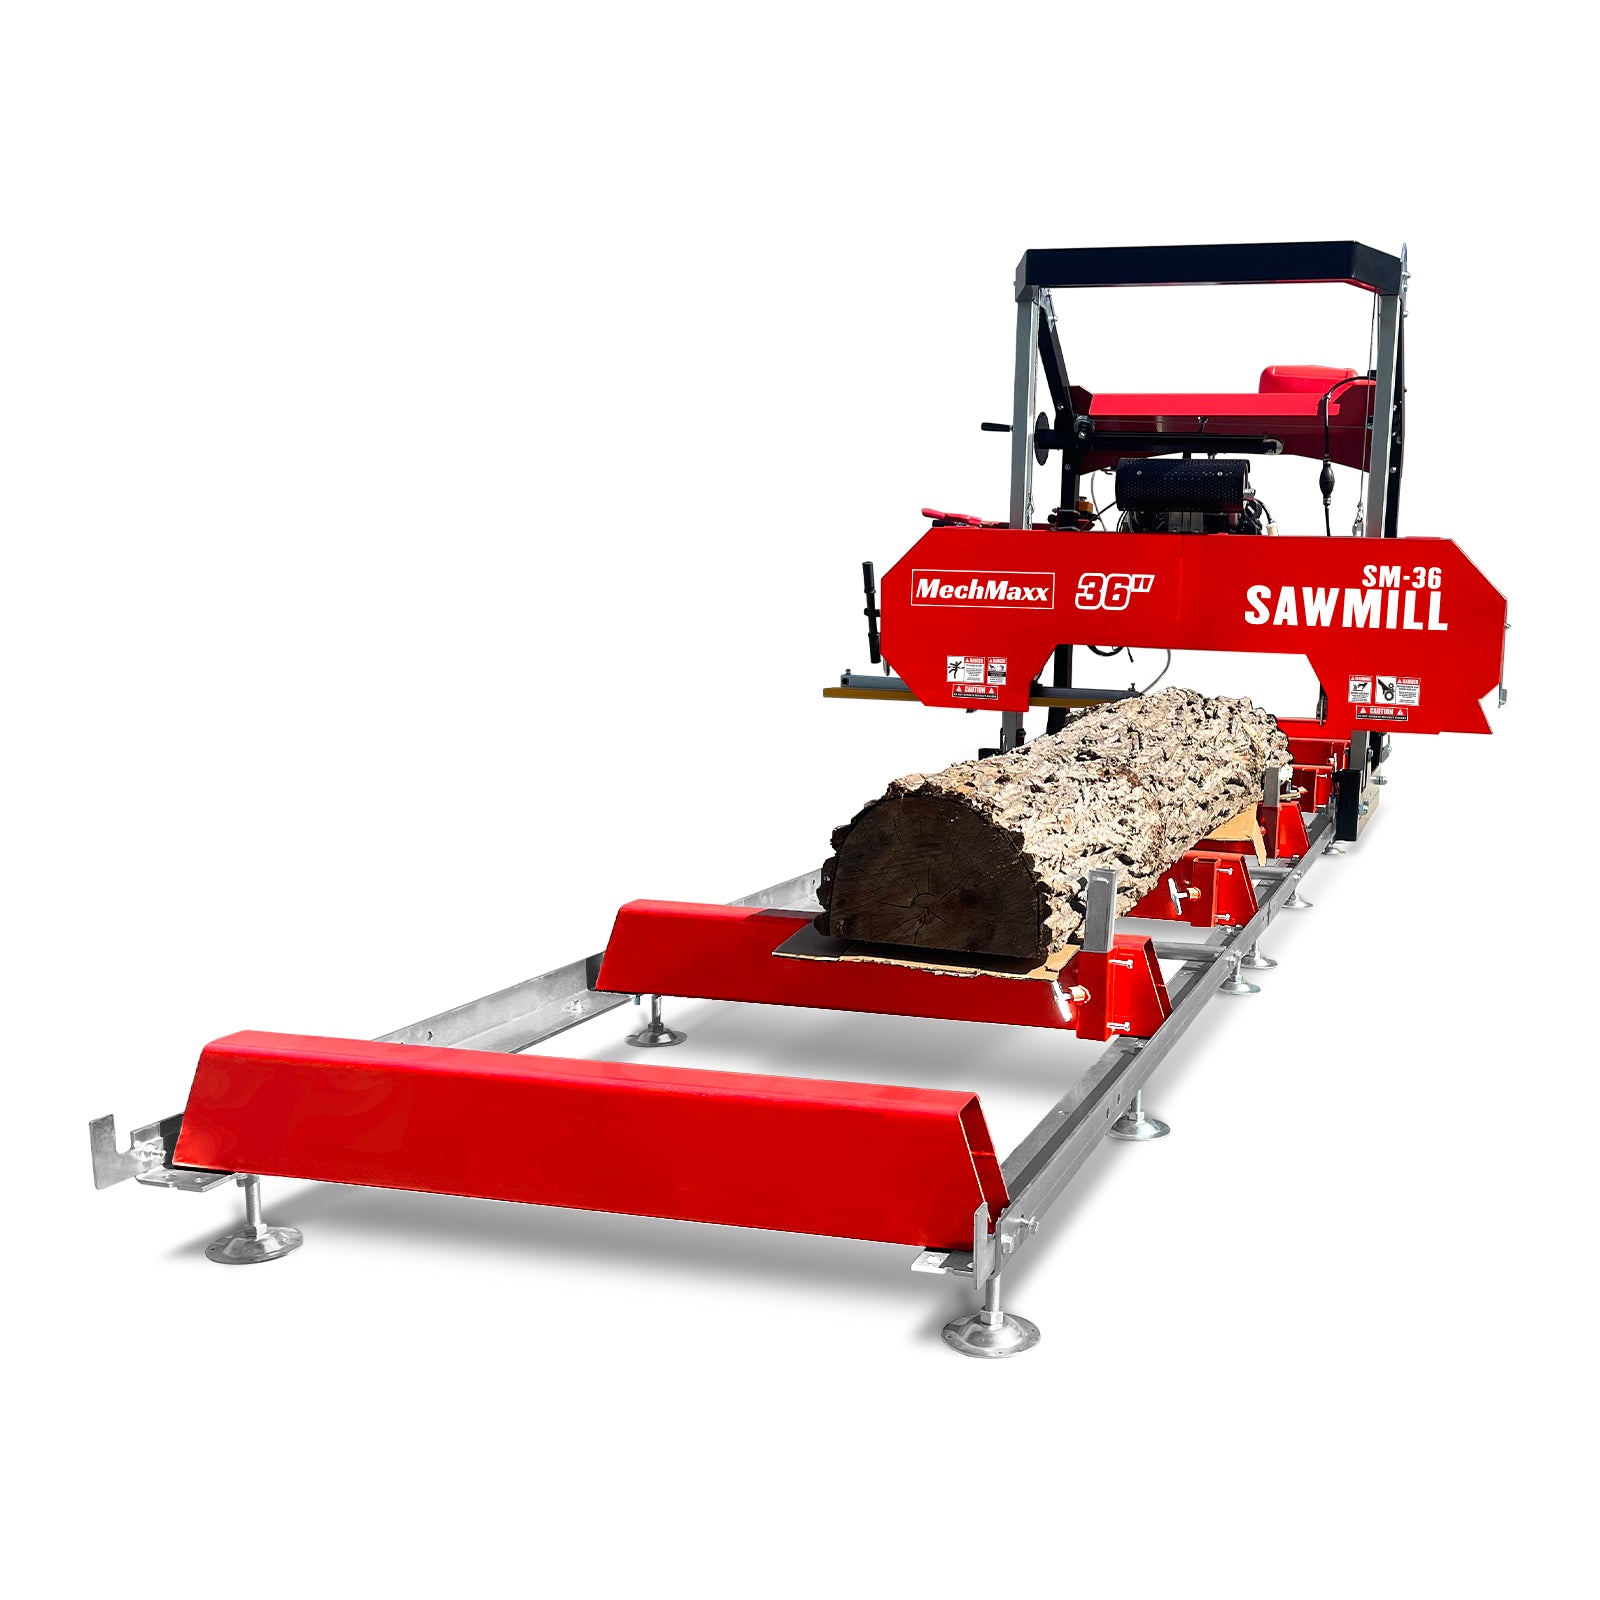 36" Portable Sawmill, 25HP 750cc Zonsen V-Twin Engine, 32" Board Width, 20' Track Length; （10 x Blades Included)